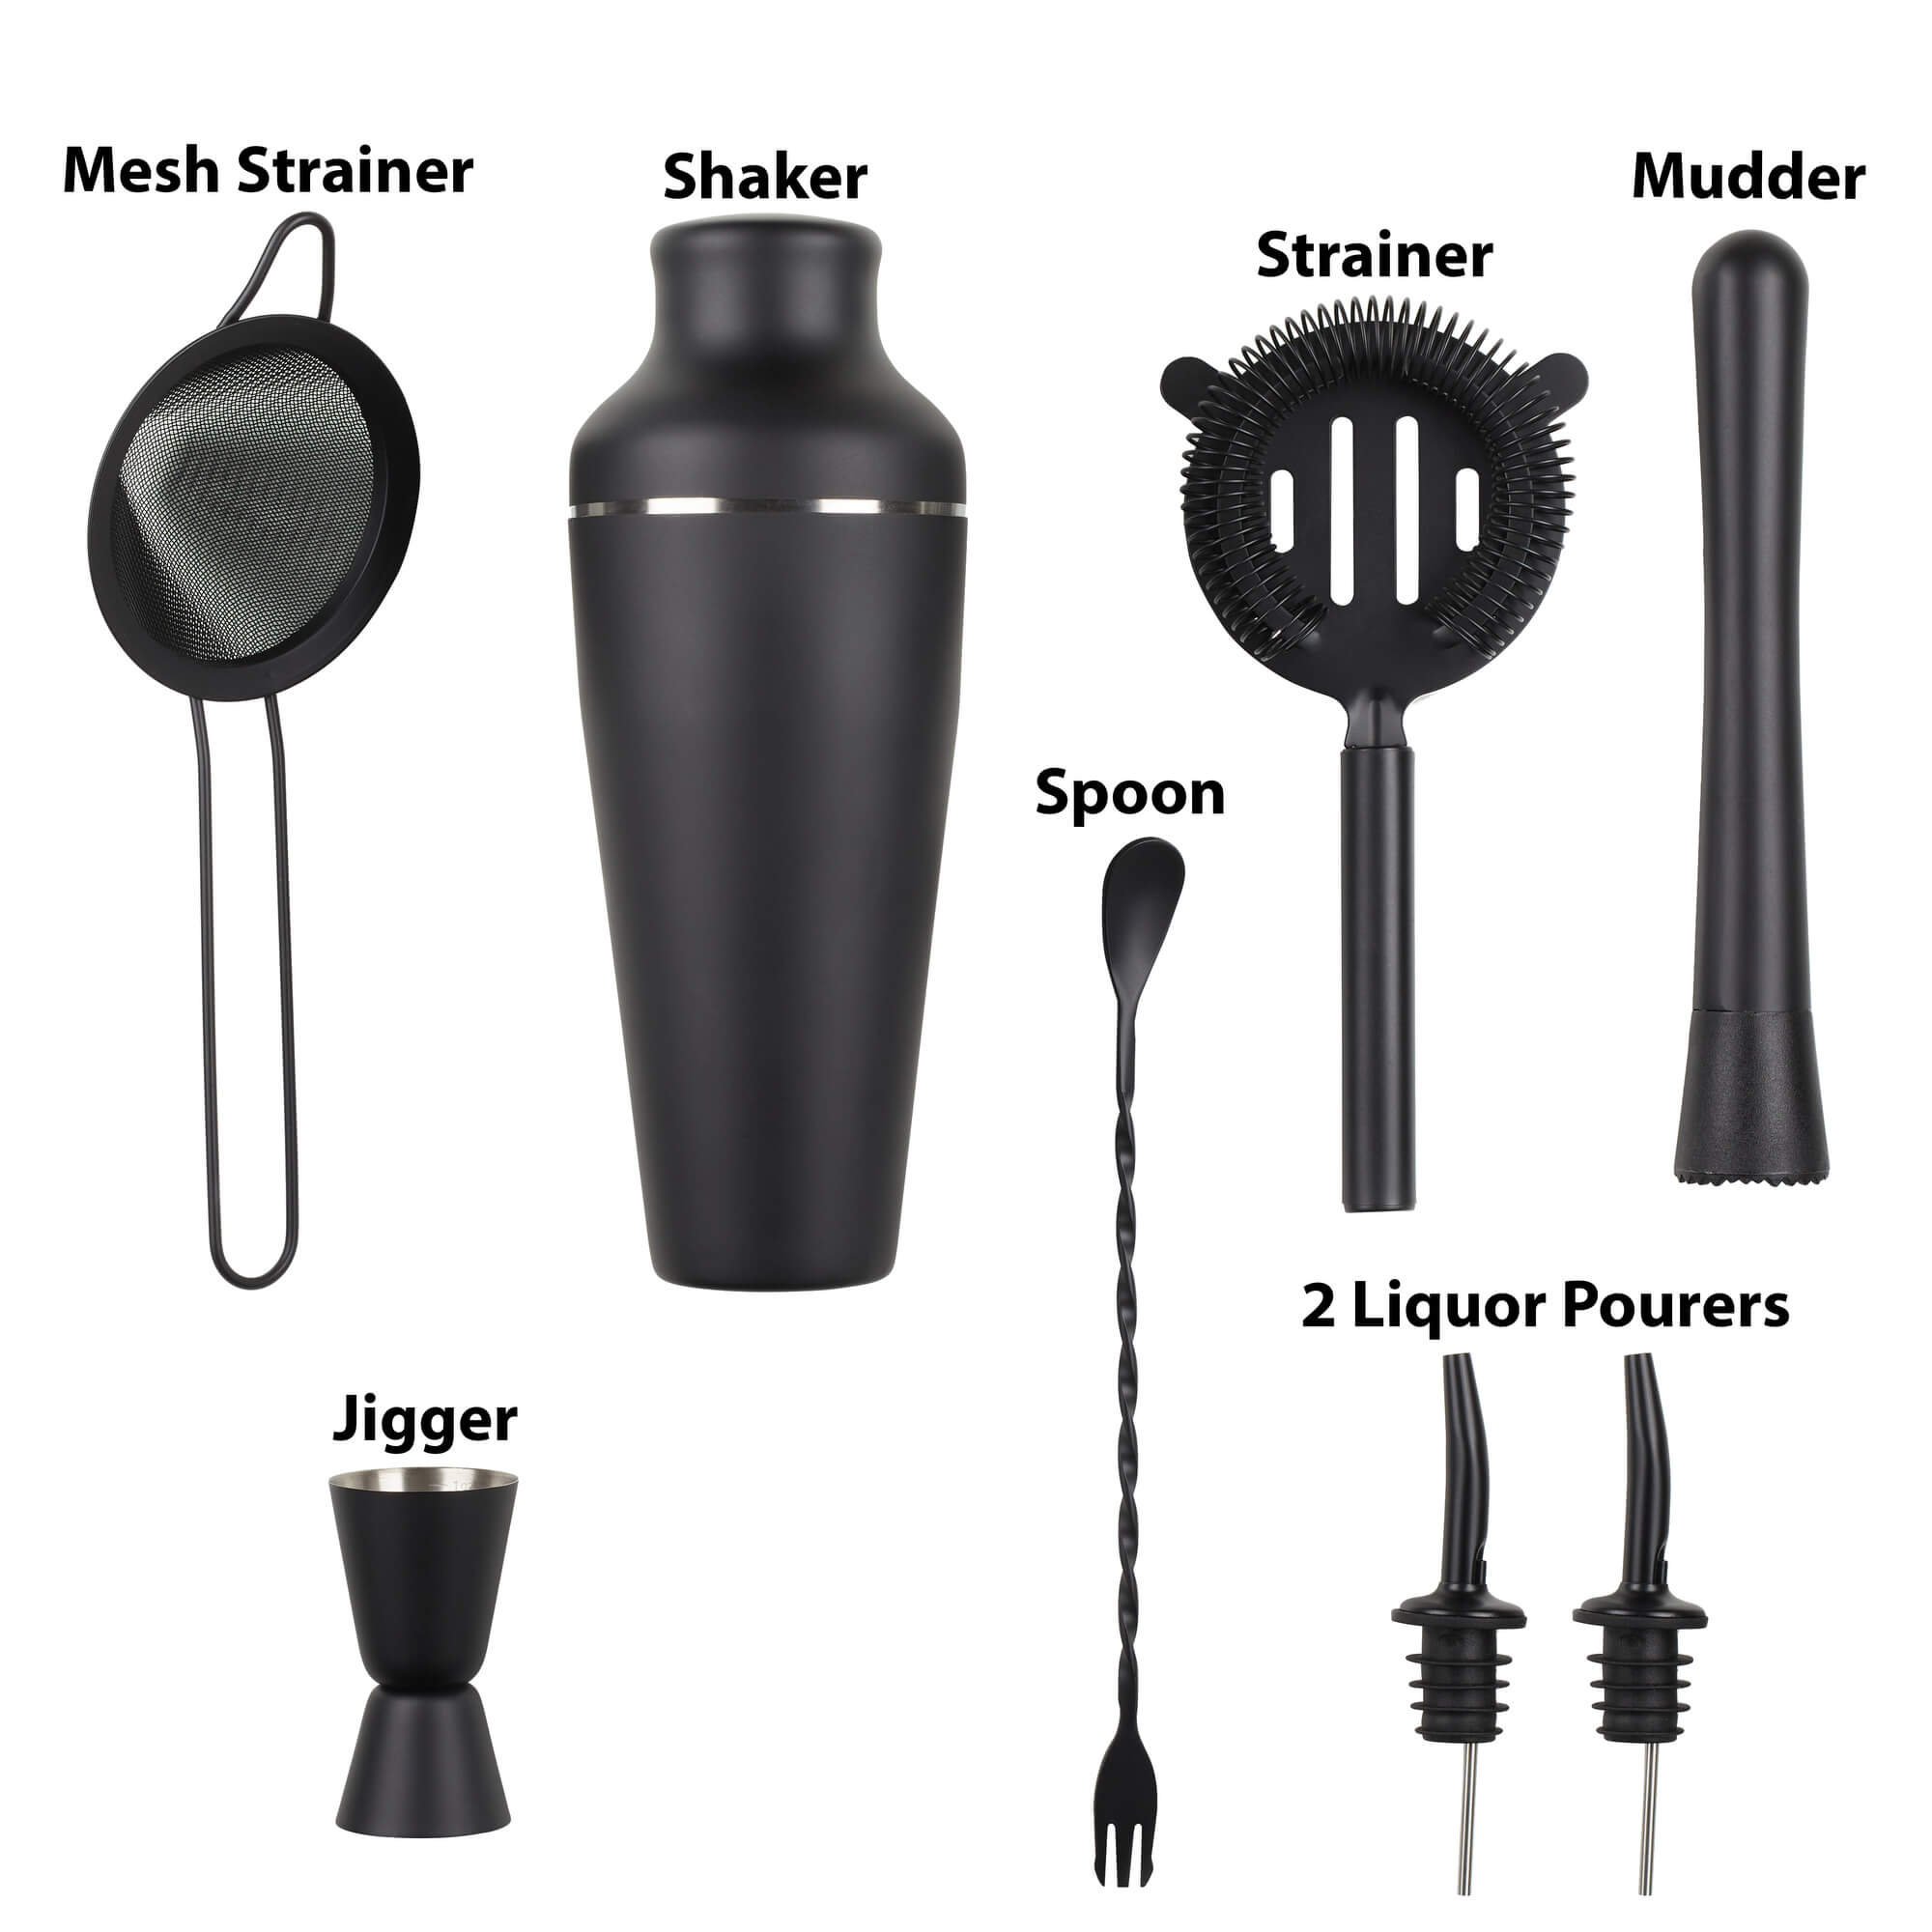  8-piece cocktail shaker set includes a shaker, strainer, jigger, muddler, spoon stirrer, ice tongs as well as two pour spouts